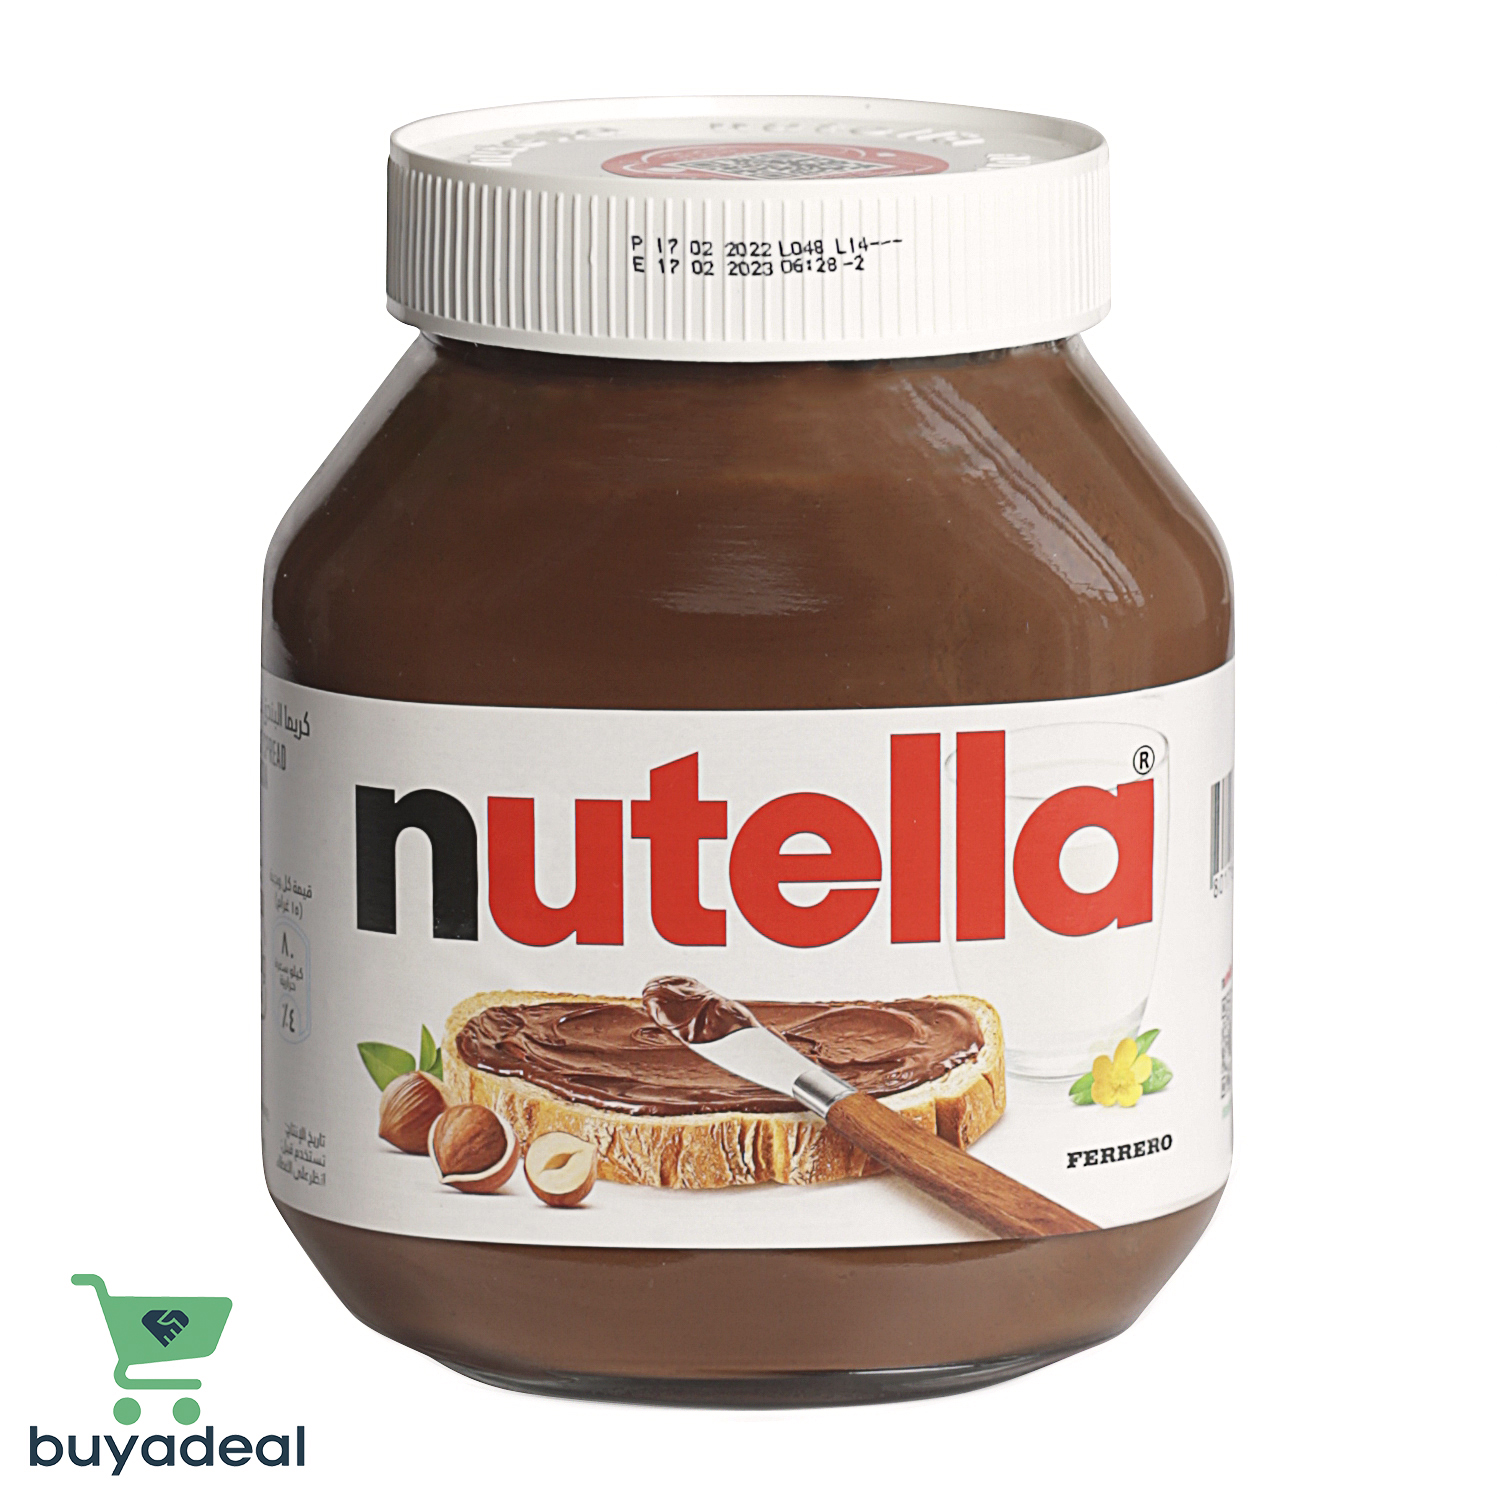 Buyadeal Product Nutella Hazelnut Spread with Cocoa 400g